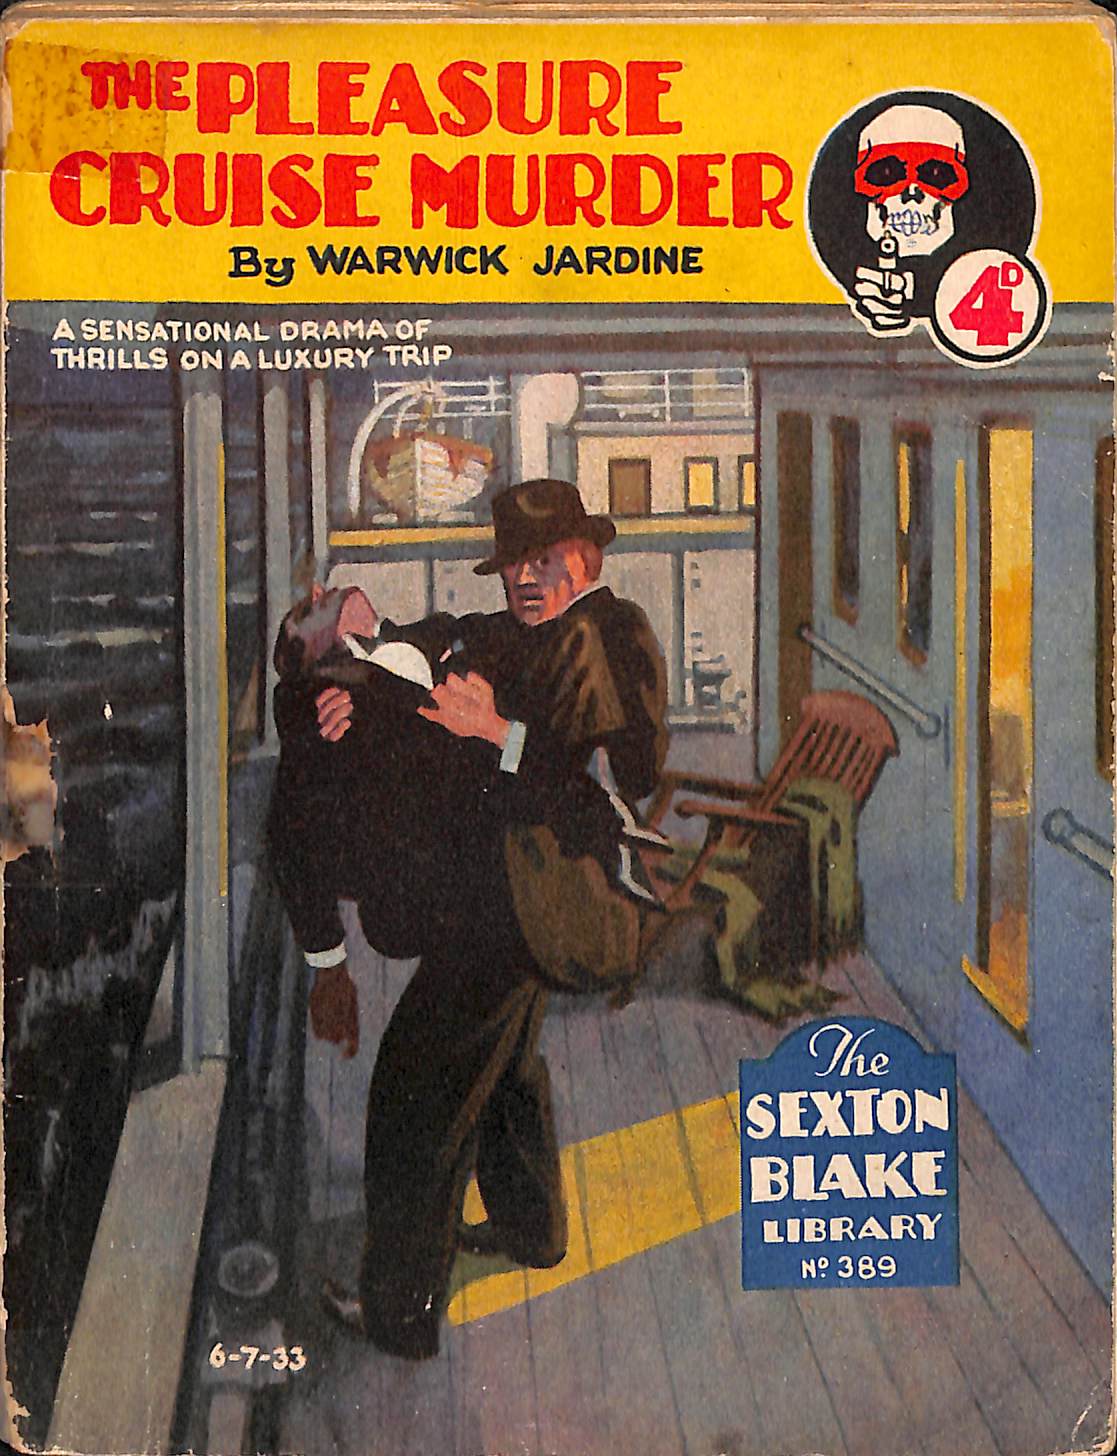 Book Cover For Sexton Blake Library S2 389 - The Pleasure Cruise Murder